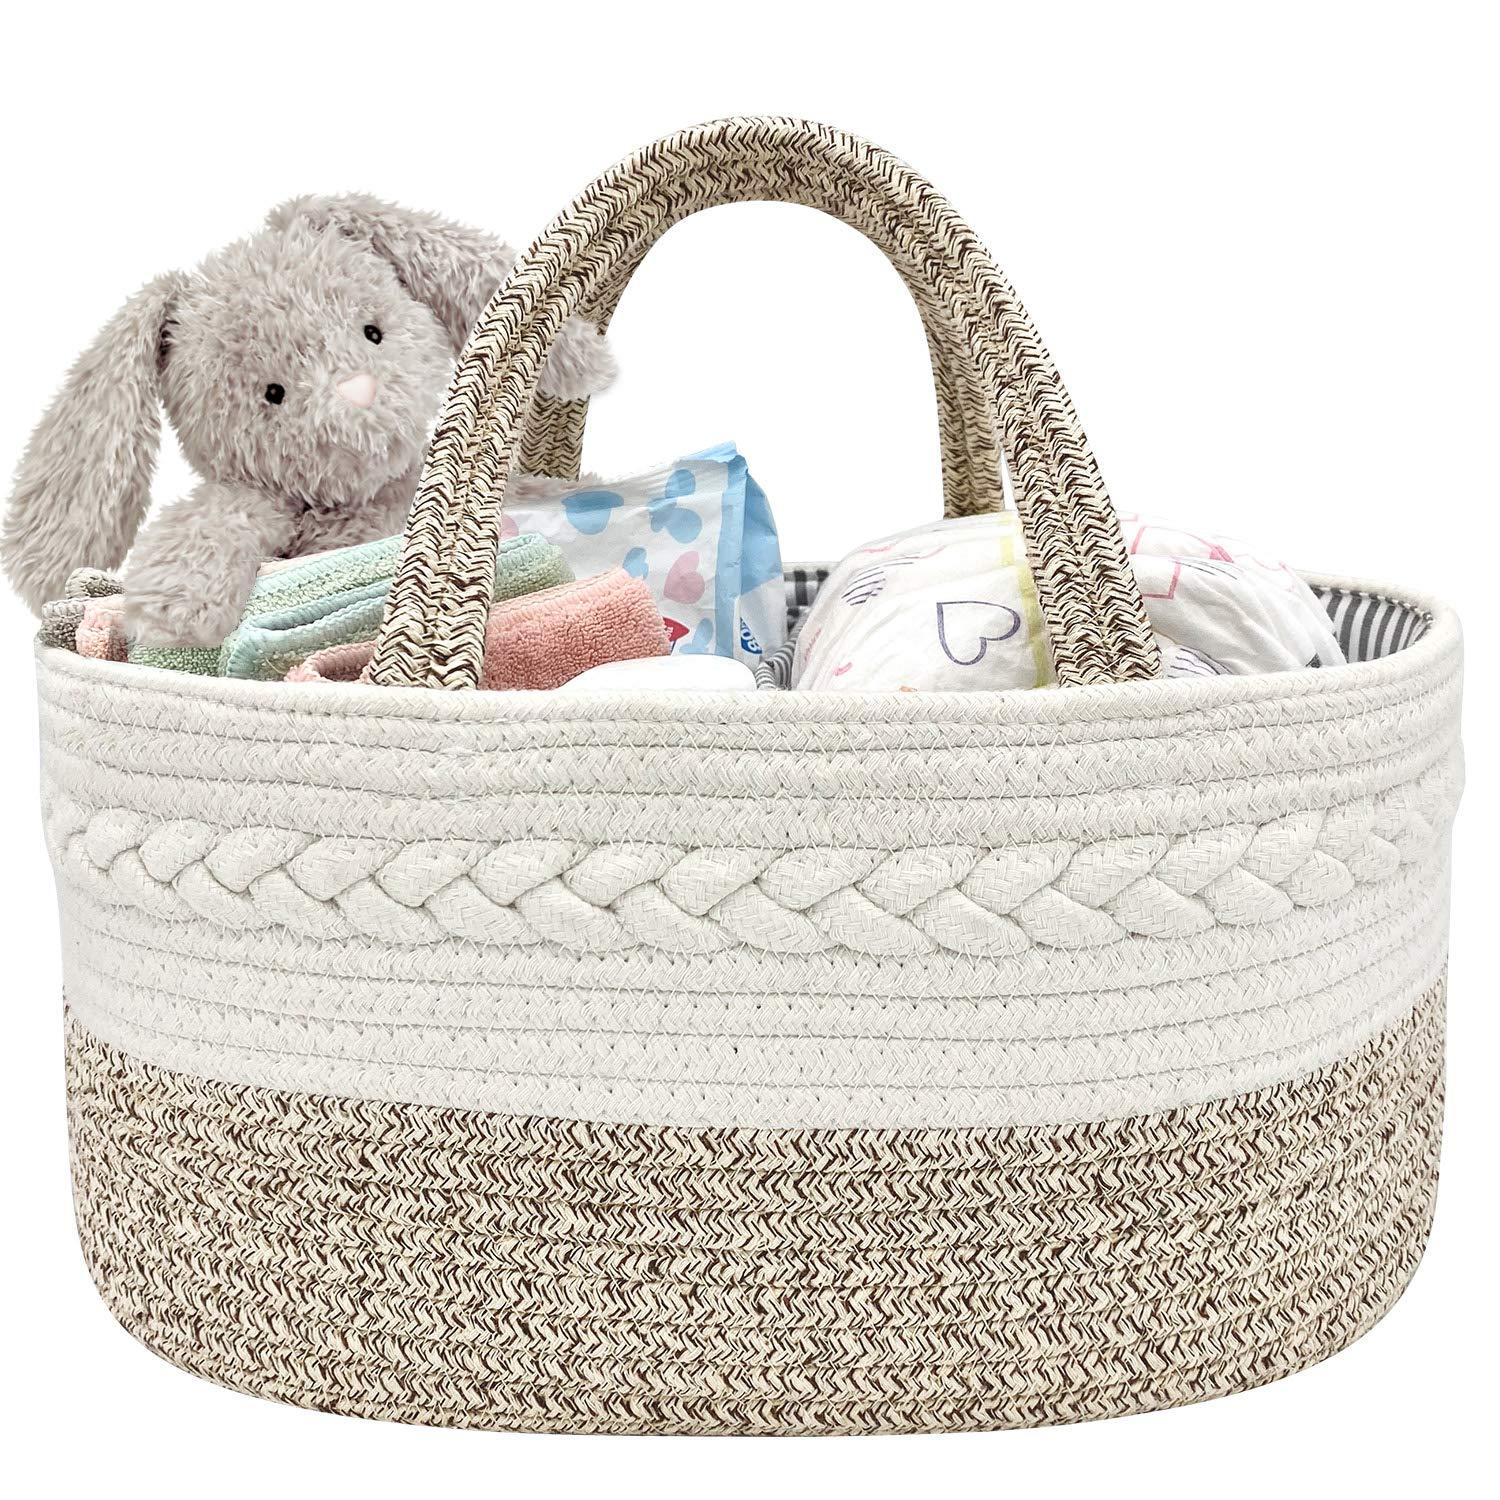 NXY Diaper Caddy, Diaper Caddy for Baby Girl, Diaper Caddy Organizer, Nursery Storage Caddy, Top Newborn Registry Gift, Baby Gift, Newborn Registry Must Haves. Cotton Rope Caddy. 14.5&quot; x8.7&quot; x7.1&quot;